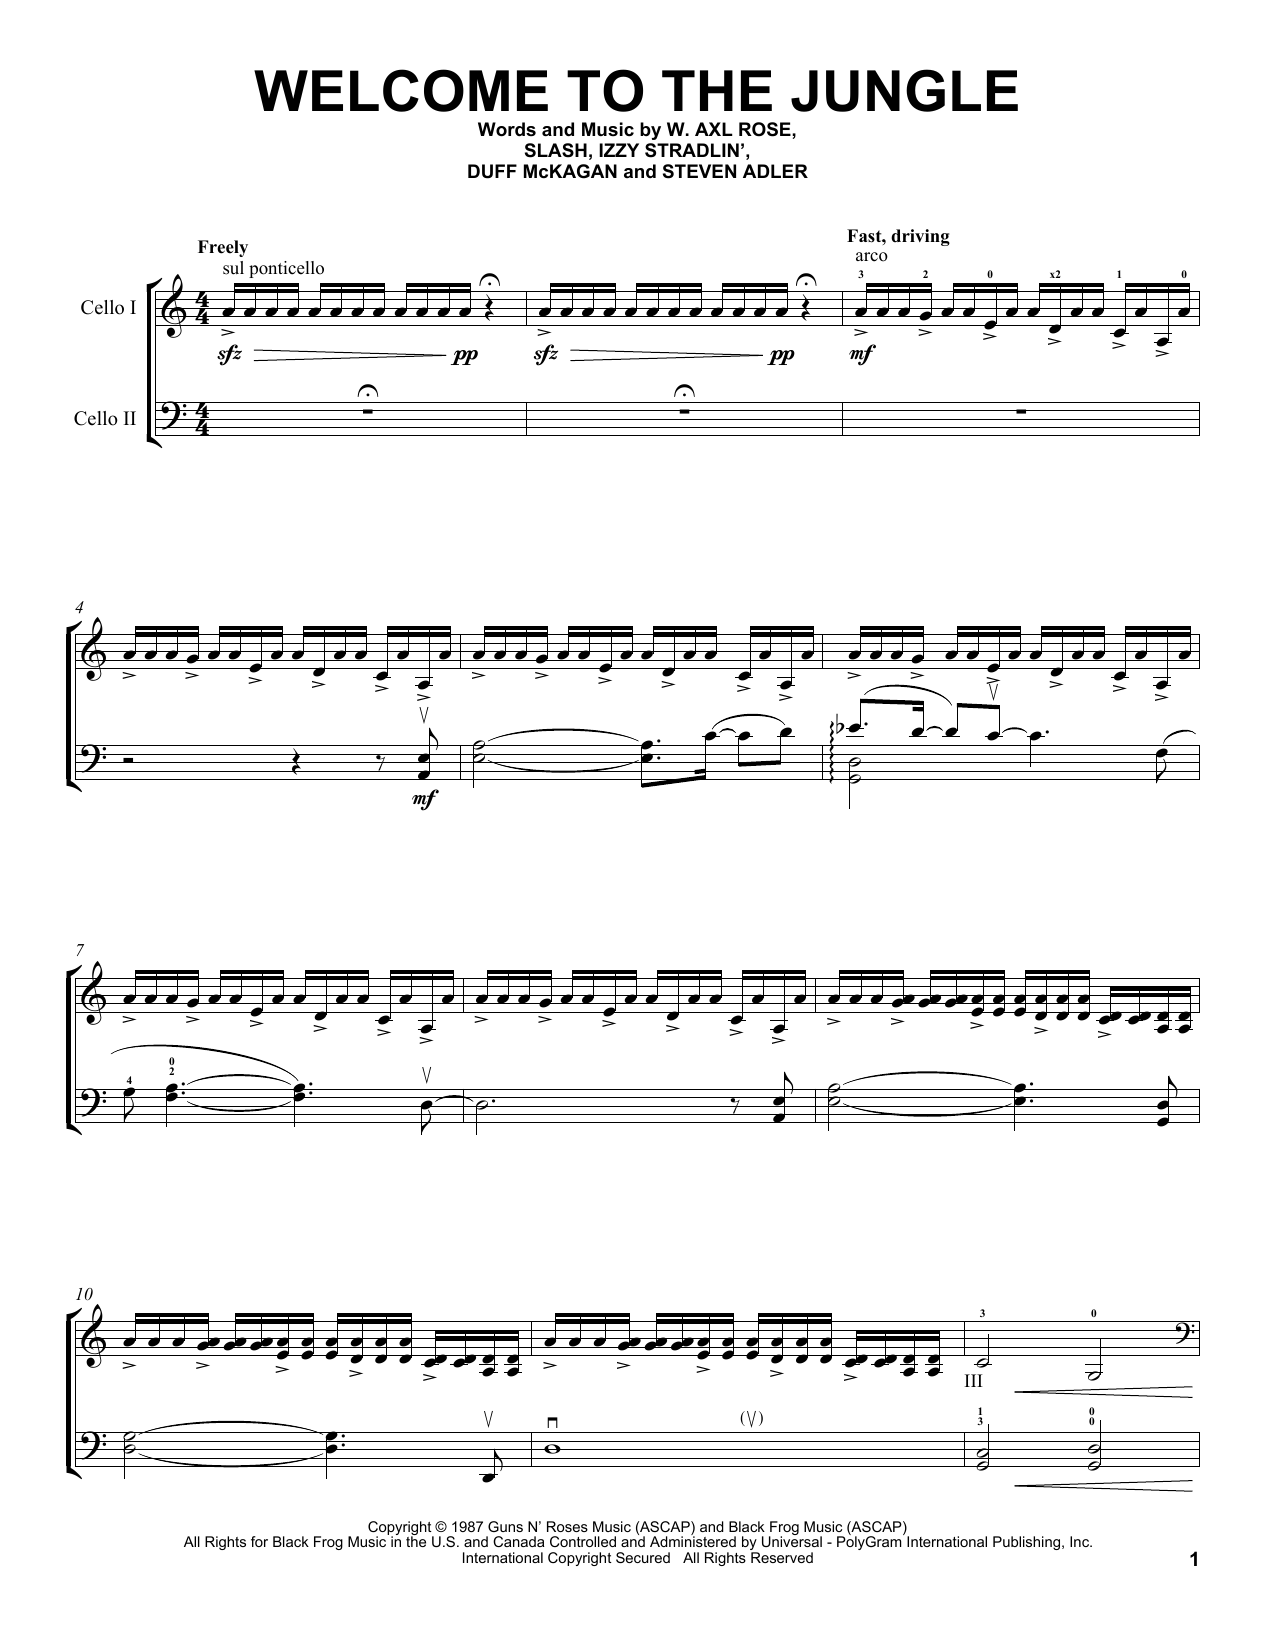 2Cellos Welcome To The Jungle sheet music notes and chords. Download Printable PDF.